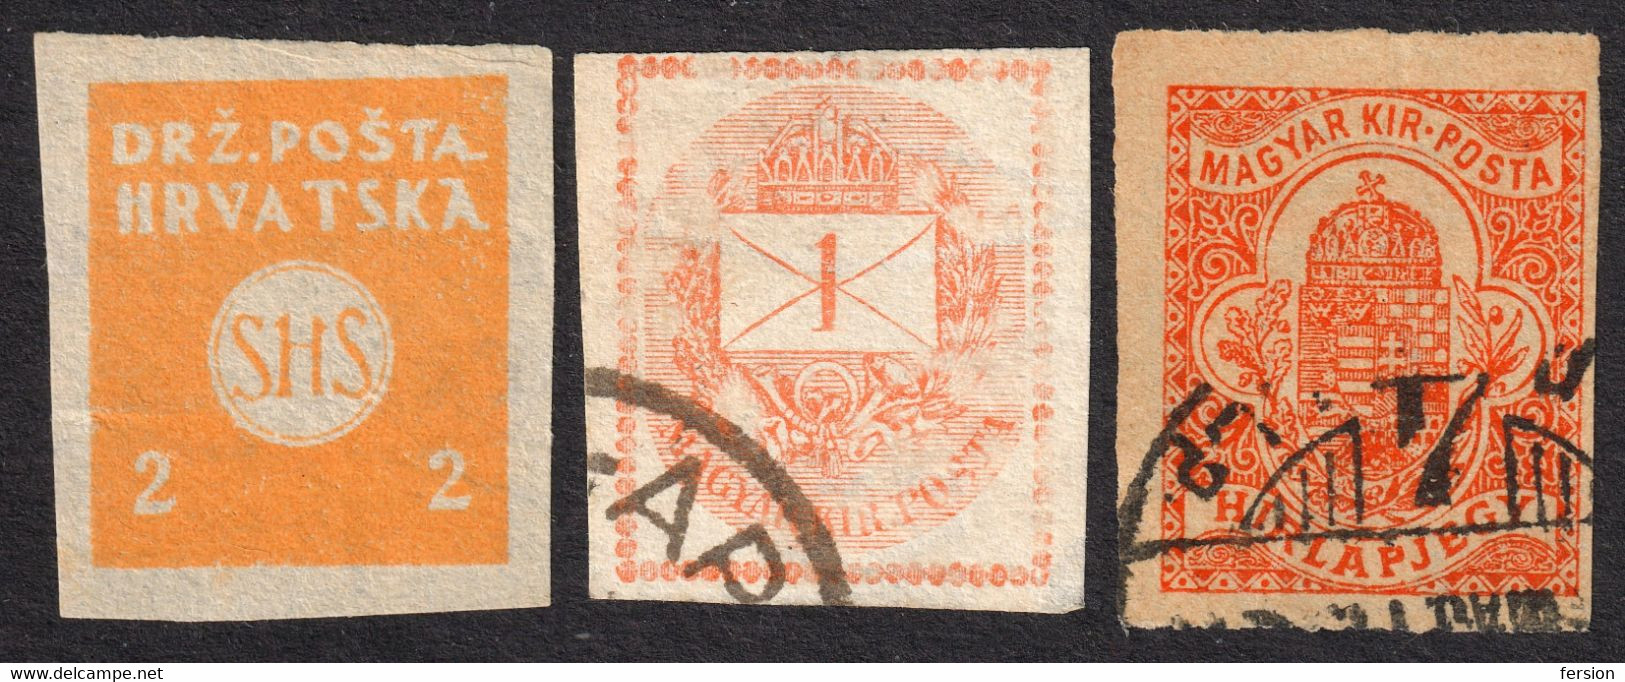 Hungary Croatia SHS Newspaper Stamp - Unperforated - Used / Letter Cover Coat Of Arms - Journaux